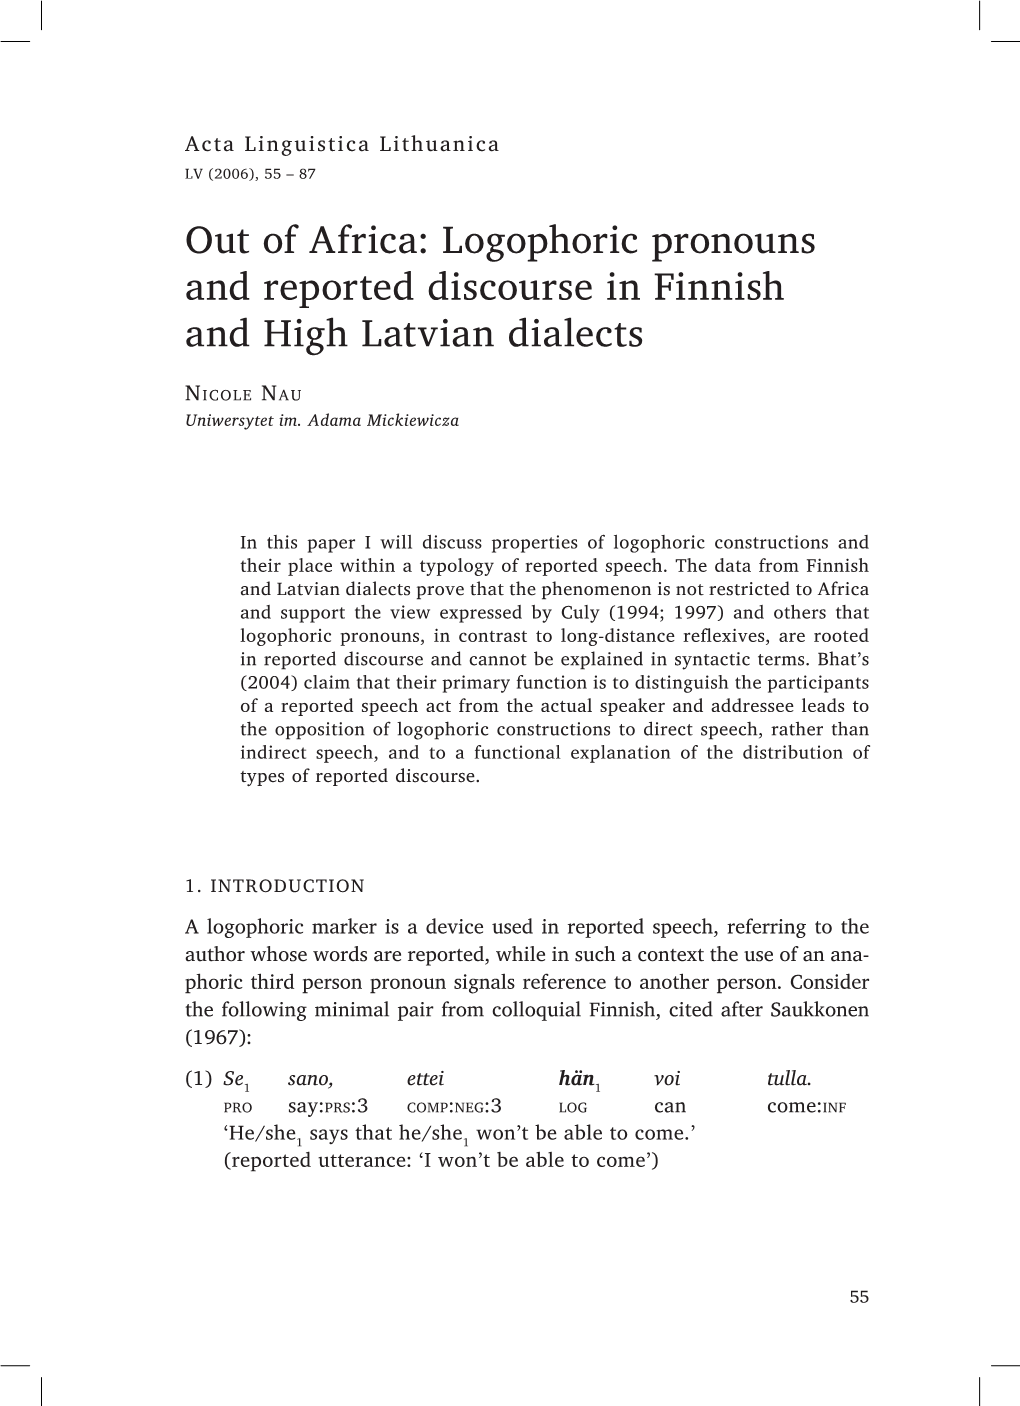 Out of Africa: Logophoric Pronouns and Reported Discourse in Finnish and High Latvian Dialects